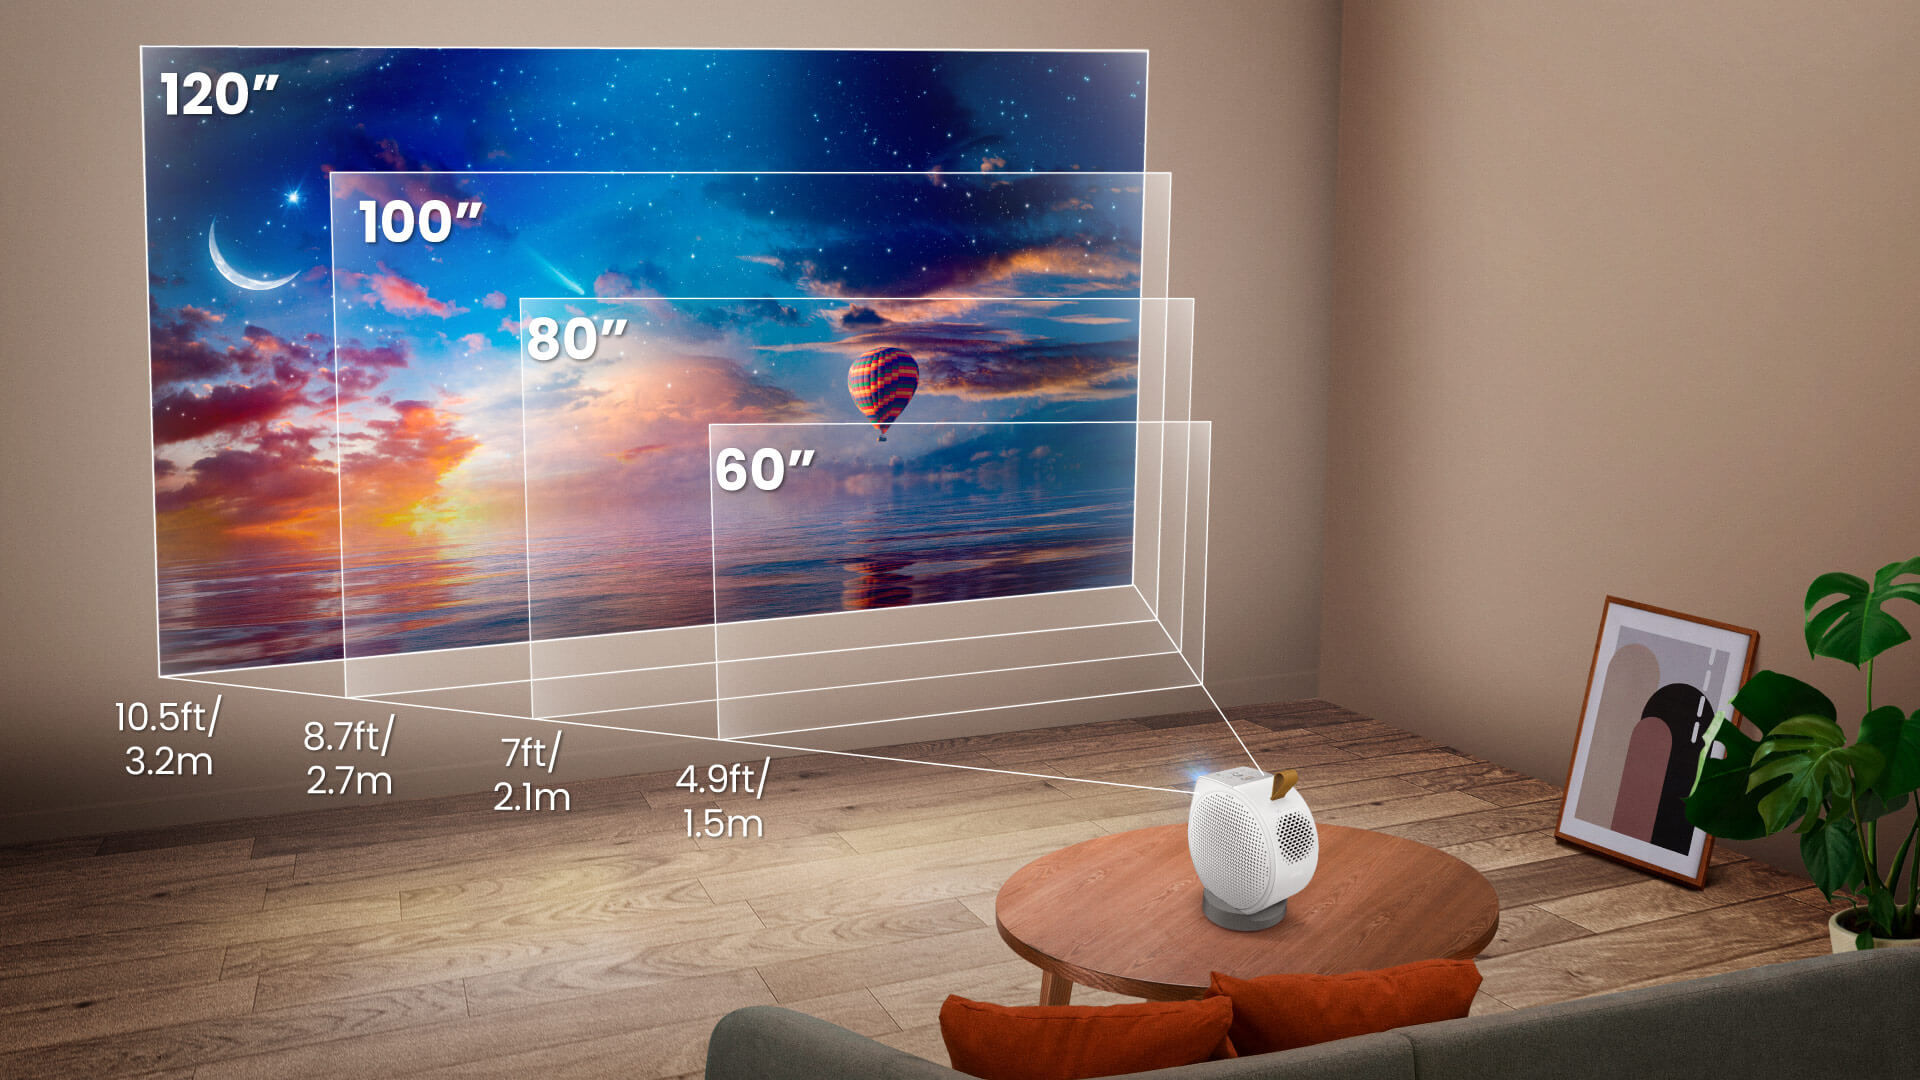 GV50 projection distance: project 100 inch screen within 3m